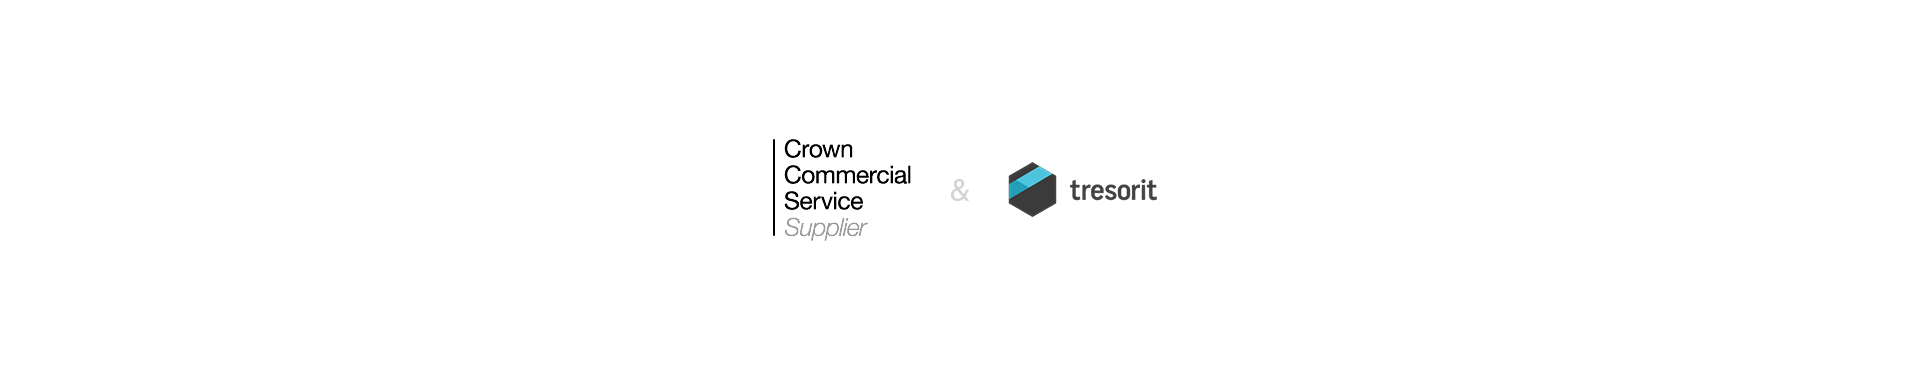 Tresorit is available to UK public sector organizations on G-Cloud 9